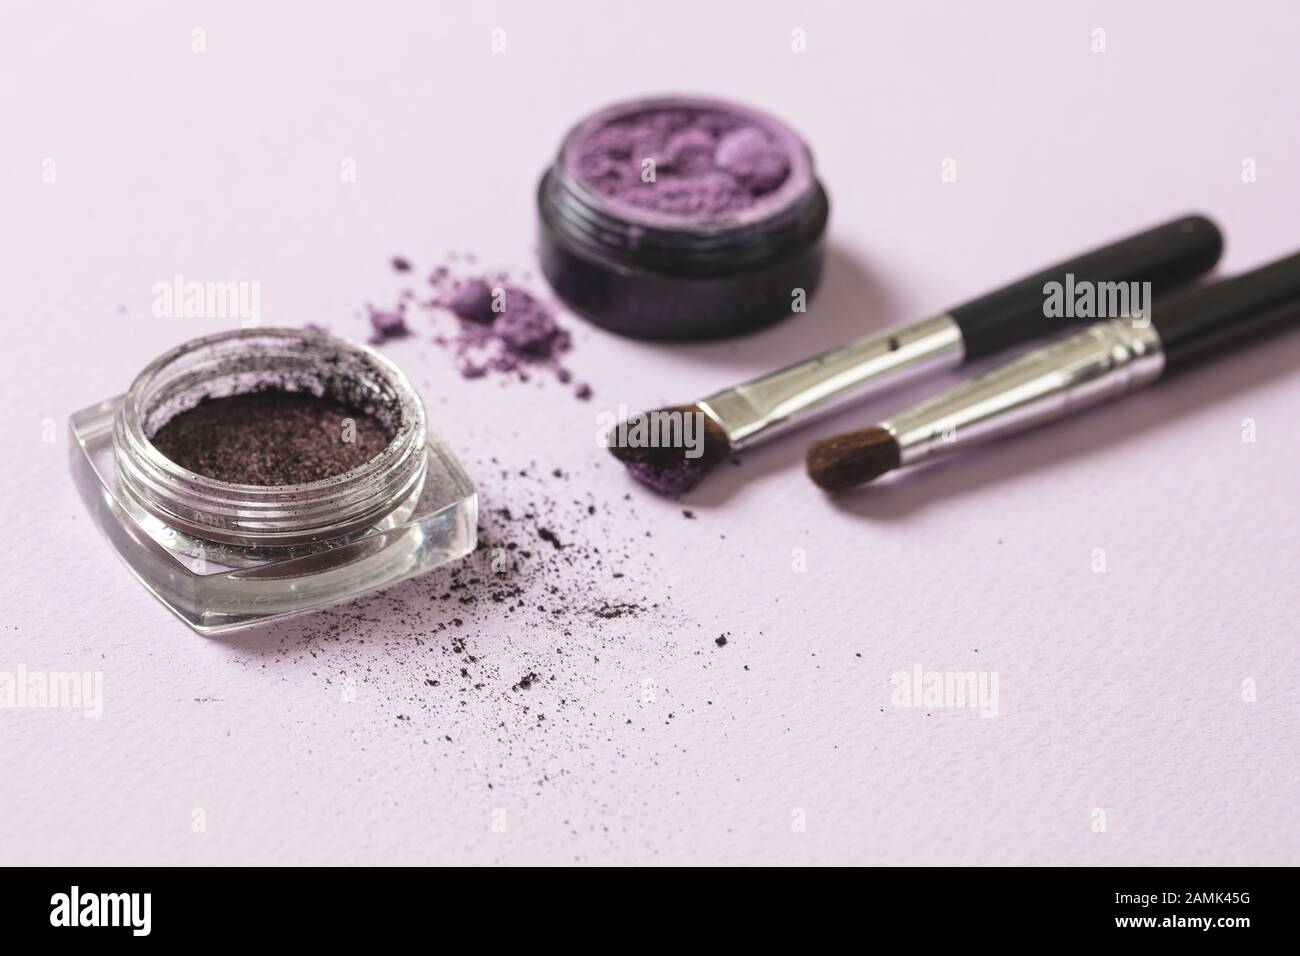 Eyeshadow purple color and brushes against pink background, closeup view. Professional tools for make up, beauty salon, cosmetics concept Stock Photo